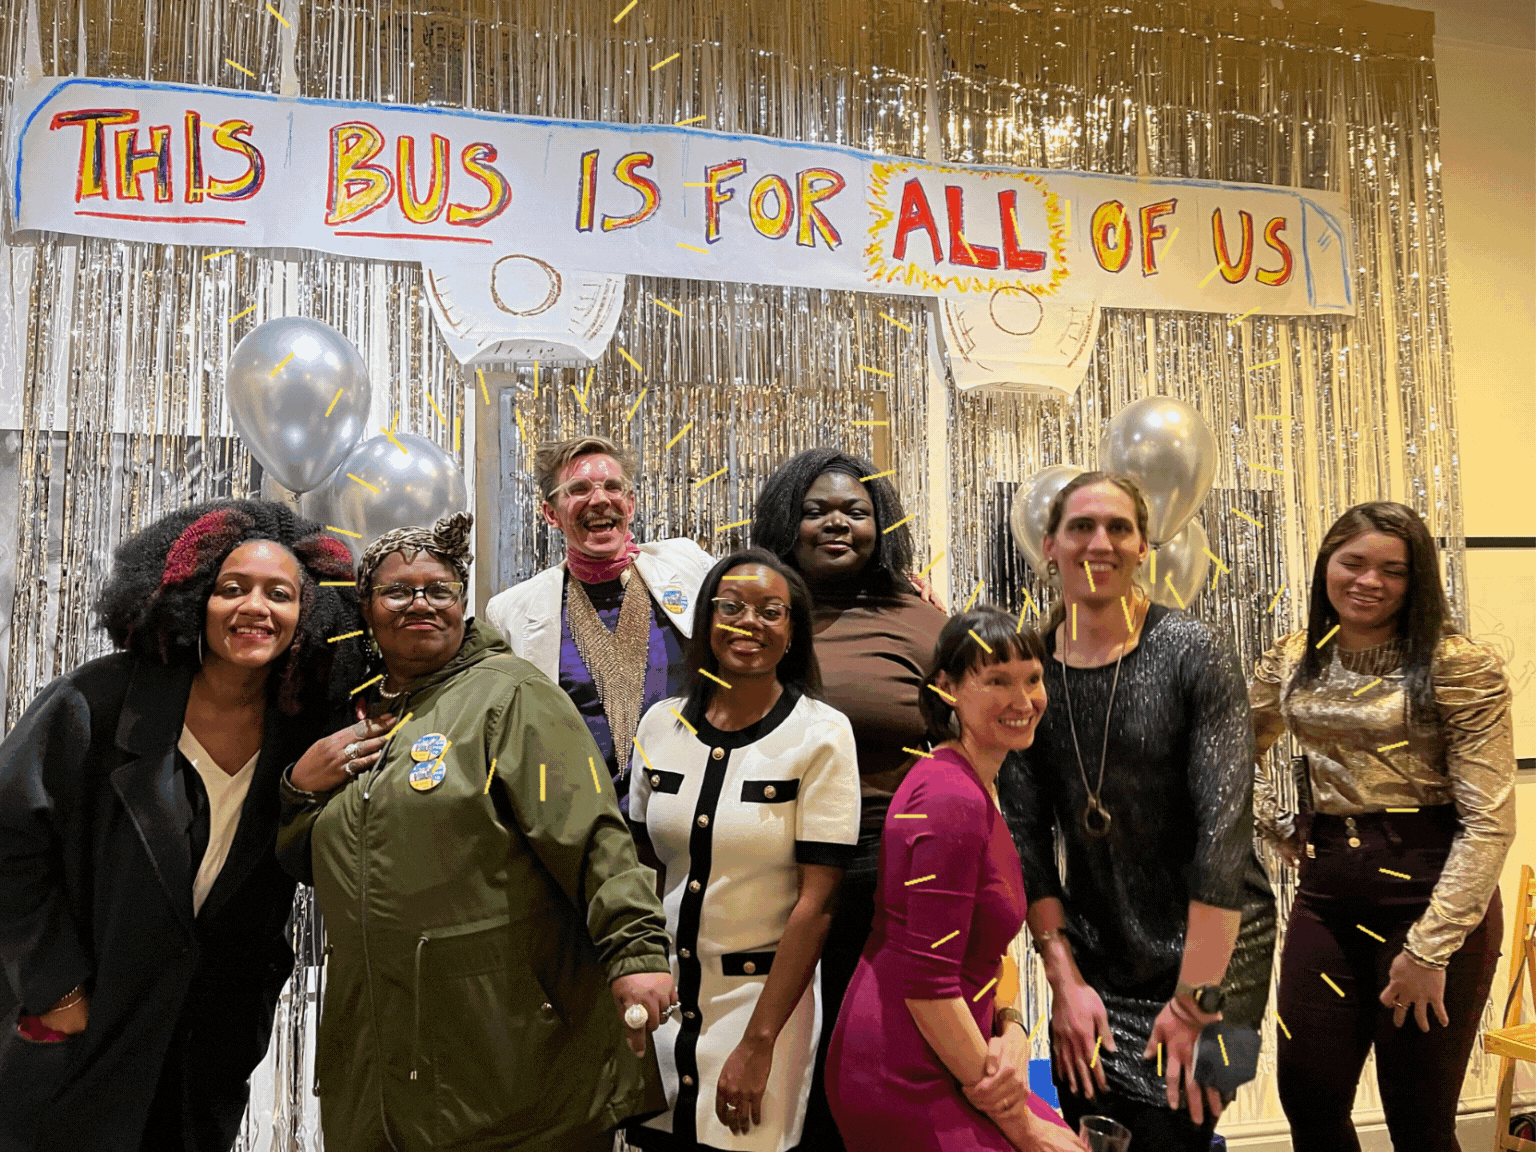 Image Description: PPT Members post at the photo booth. Everyone is smiling and wearing wonderful outfits, bright colors and fun, shiny clothing. The photo booth backdrop is silver streamers, silver ballons and a handmade sign that reads: “THIS BUS IS FOR ALL OF US”.